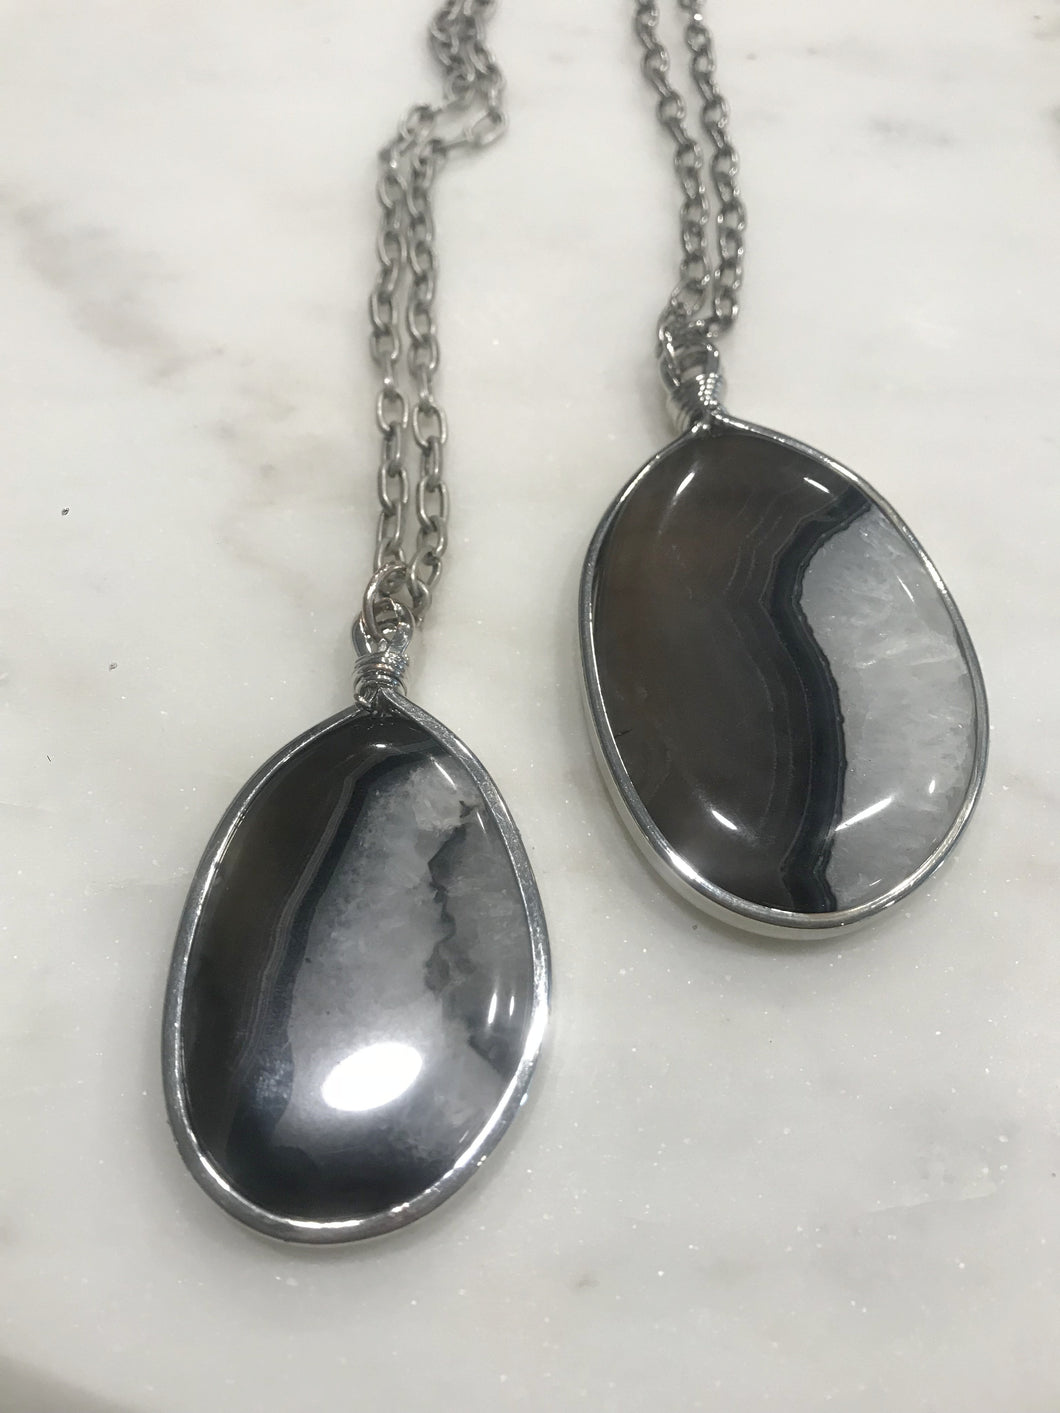 Agate necklaces